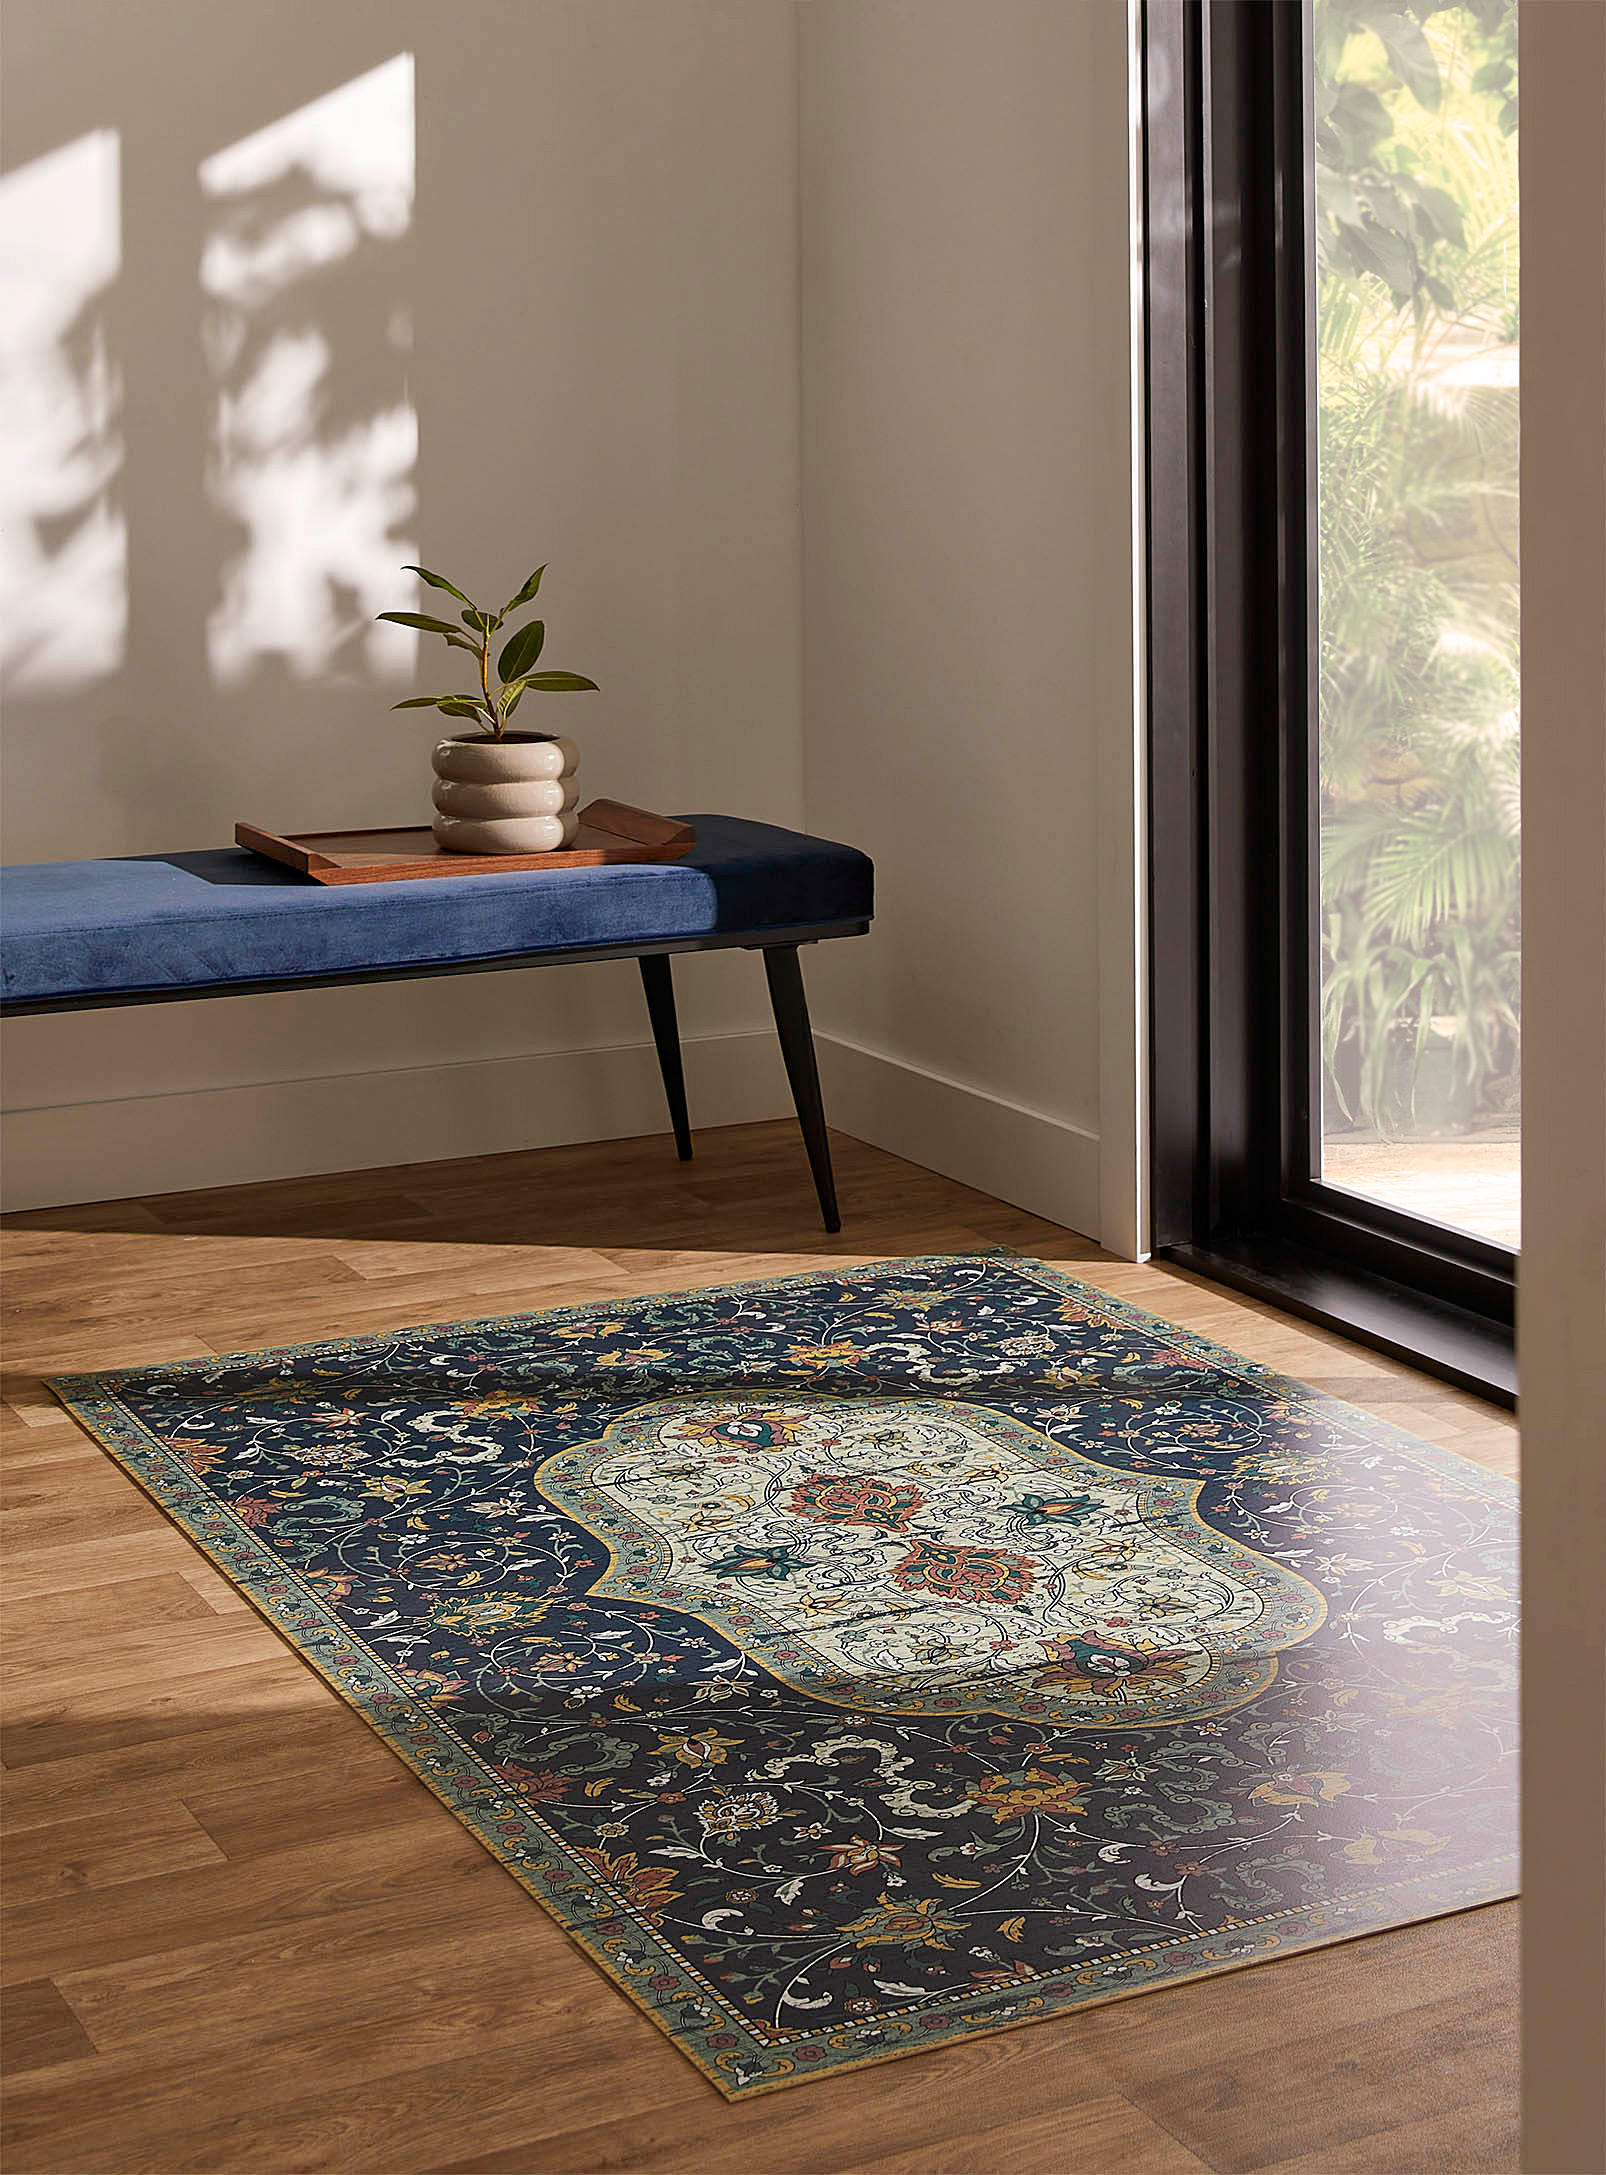 Adama Floral Medallion Vinyl Mat See Available Sizes In Patterned Blue